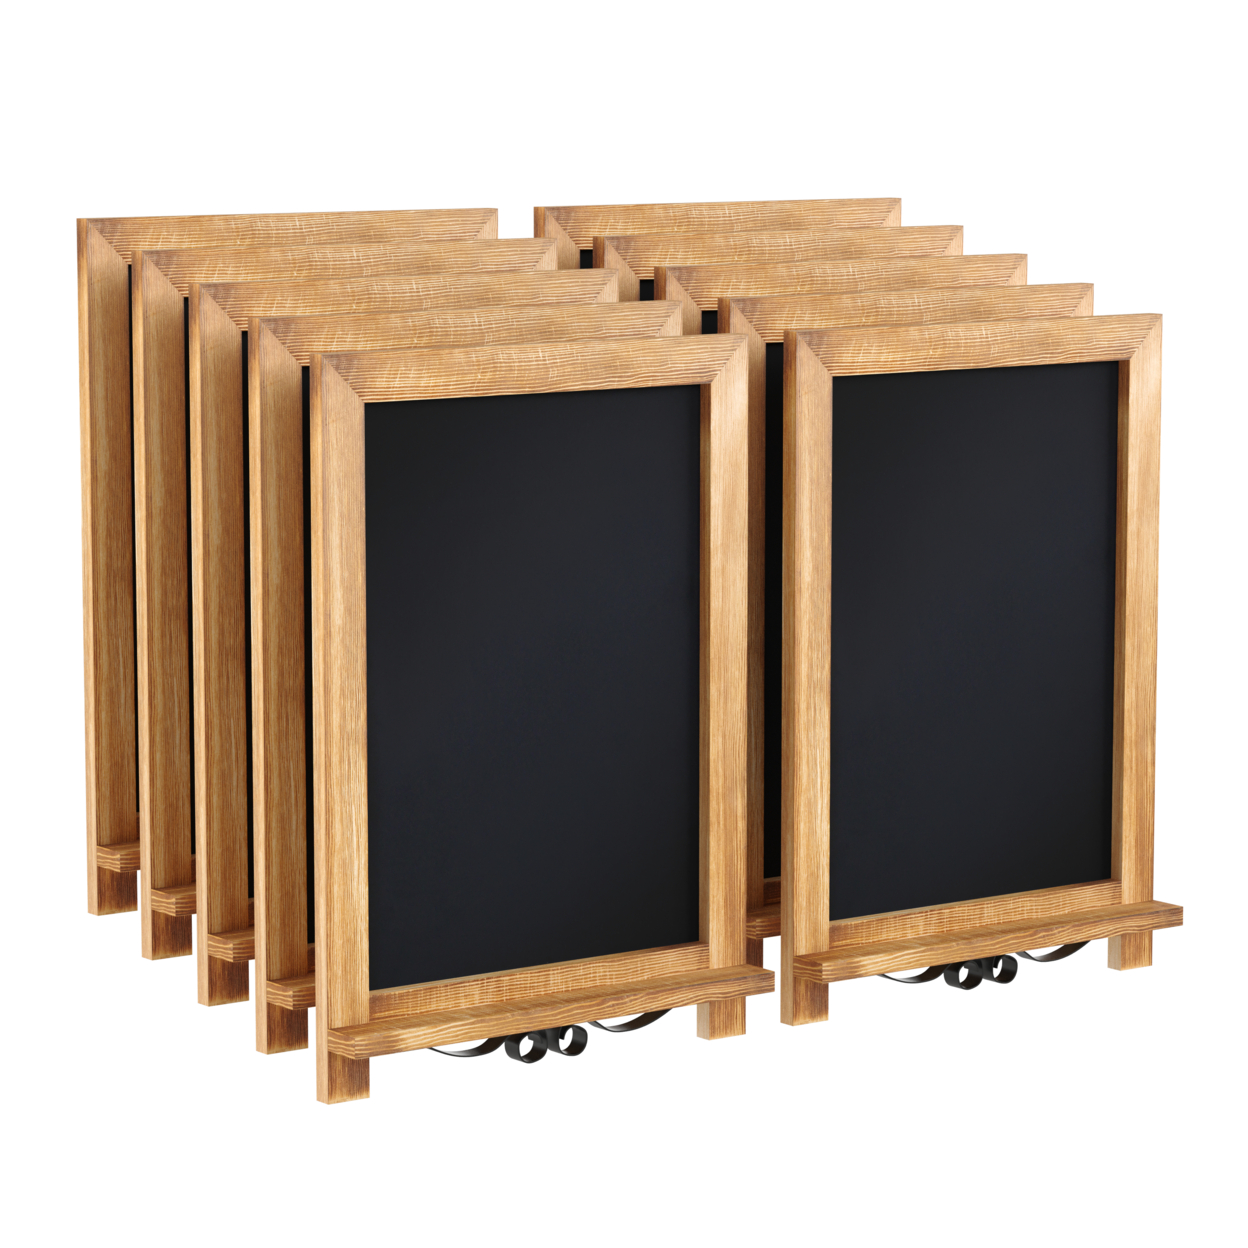 Rustic Magnetic Chalkboard, Scrolled Black Legs, Set Of 10, Torched Wood